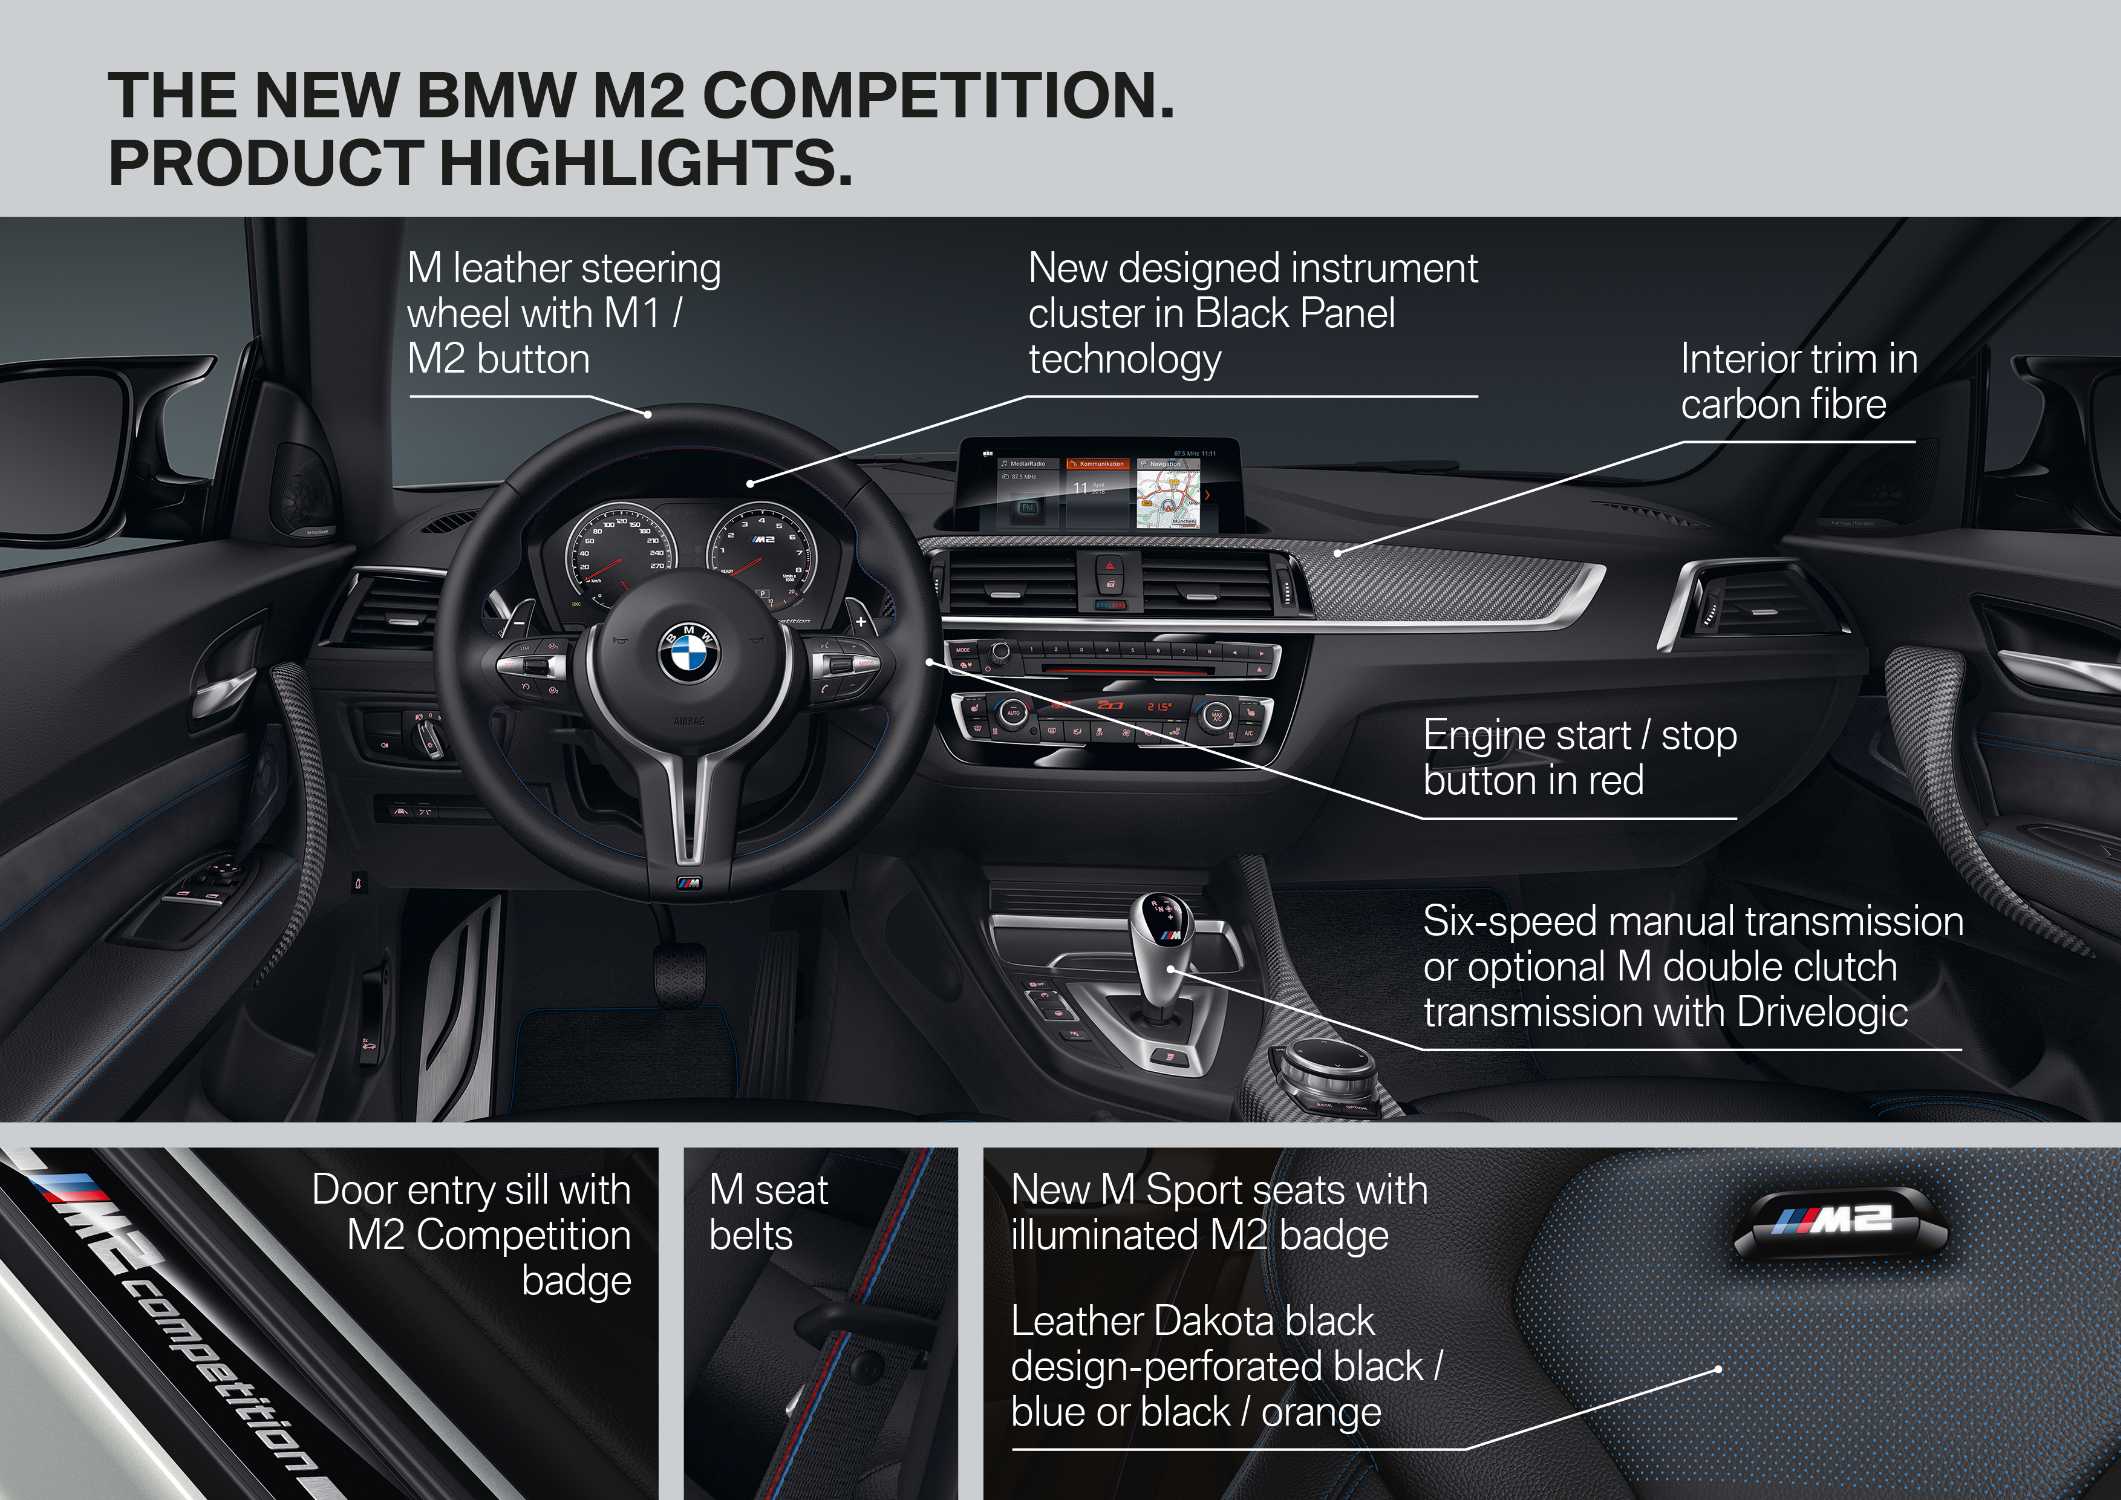 The new BMW M2 Competition (04/2018).